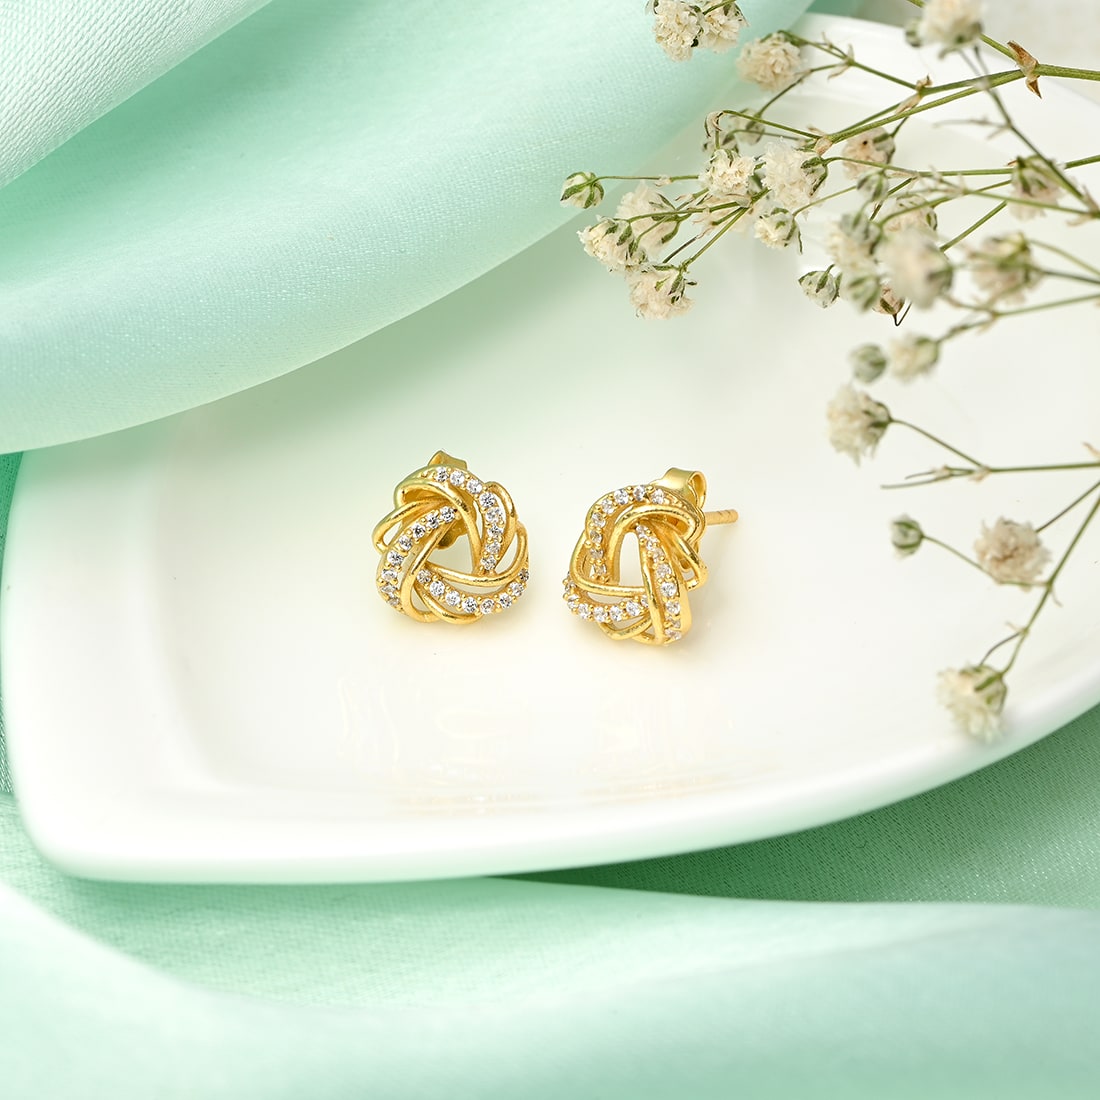 Radiant Brilliance Gold Plated 925 Sterling Silver Stud Earrings